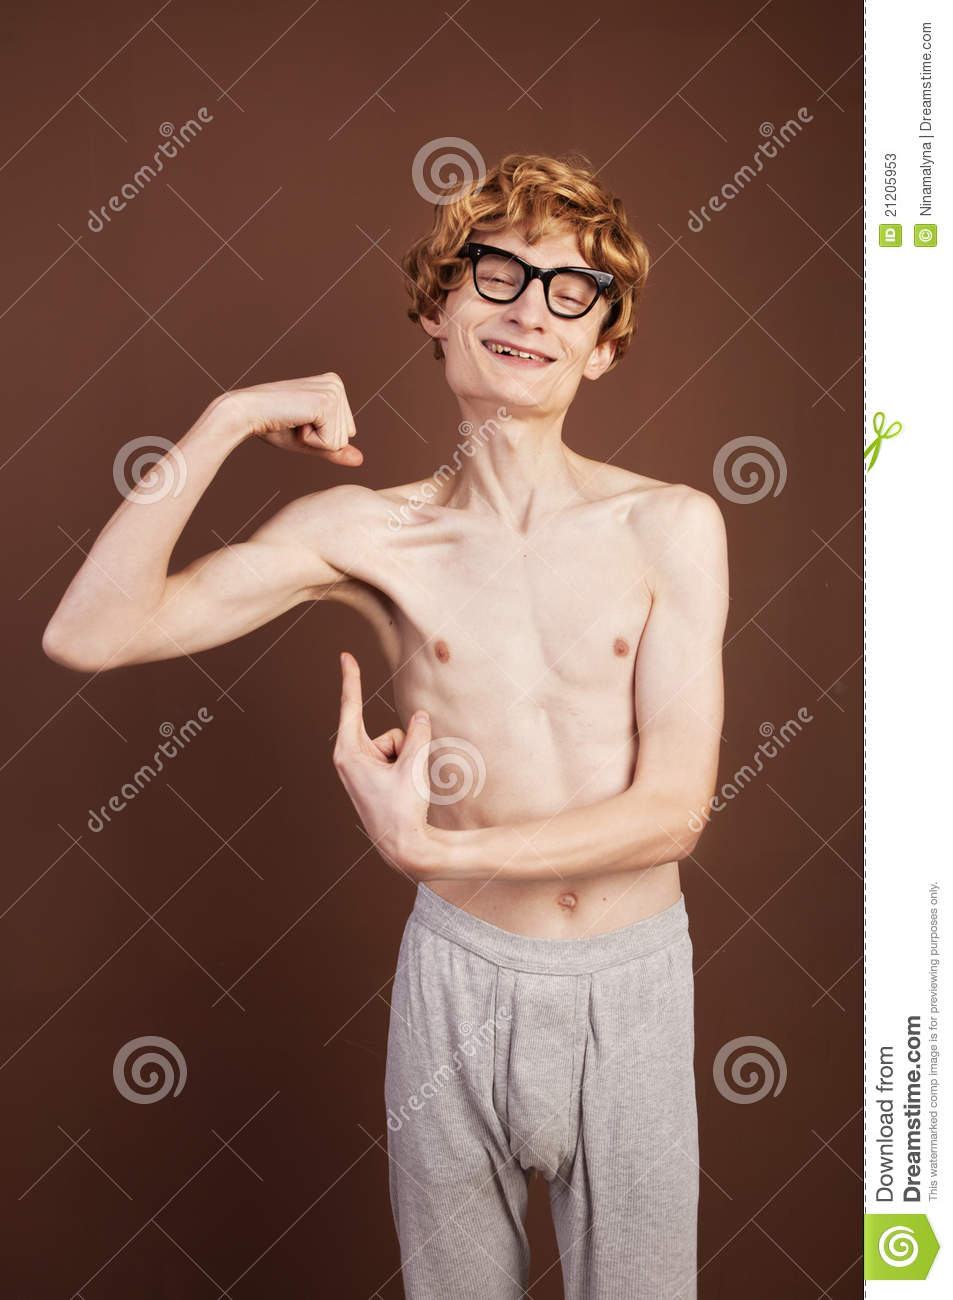 Funny Skinny Nerd Showing Muscles